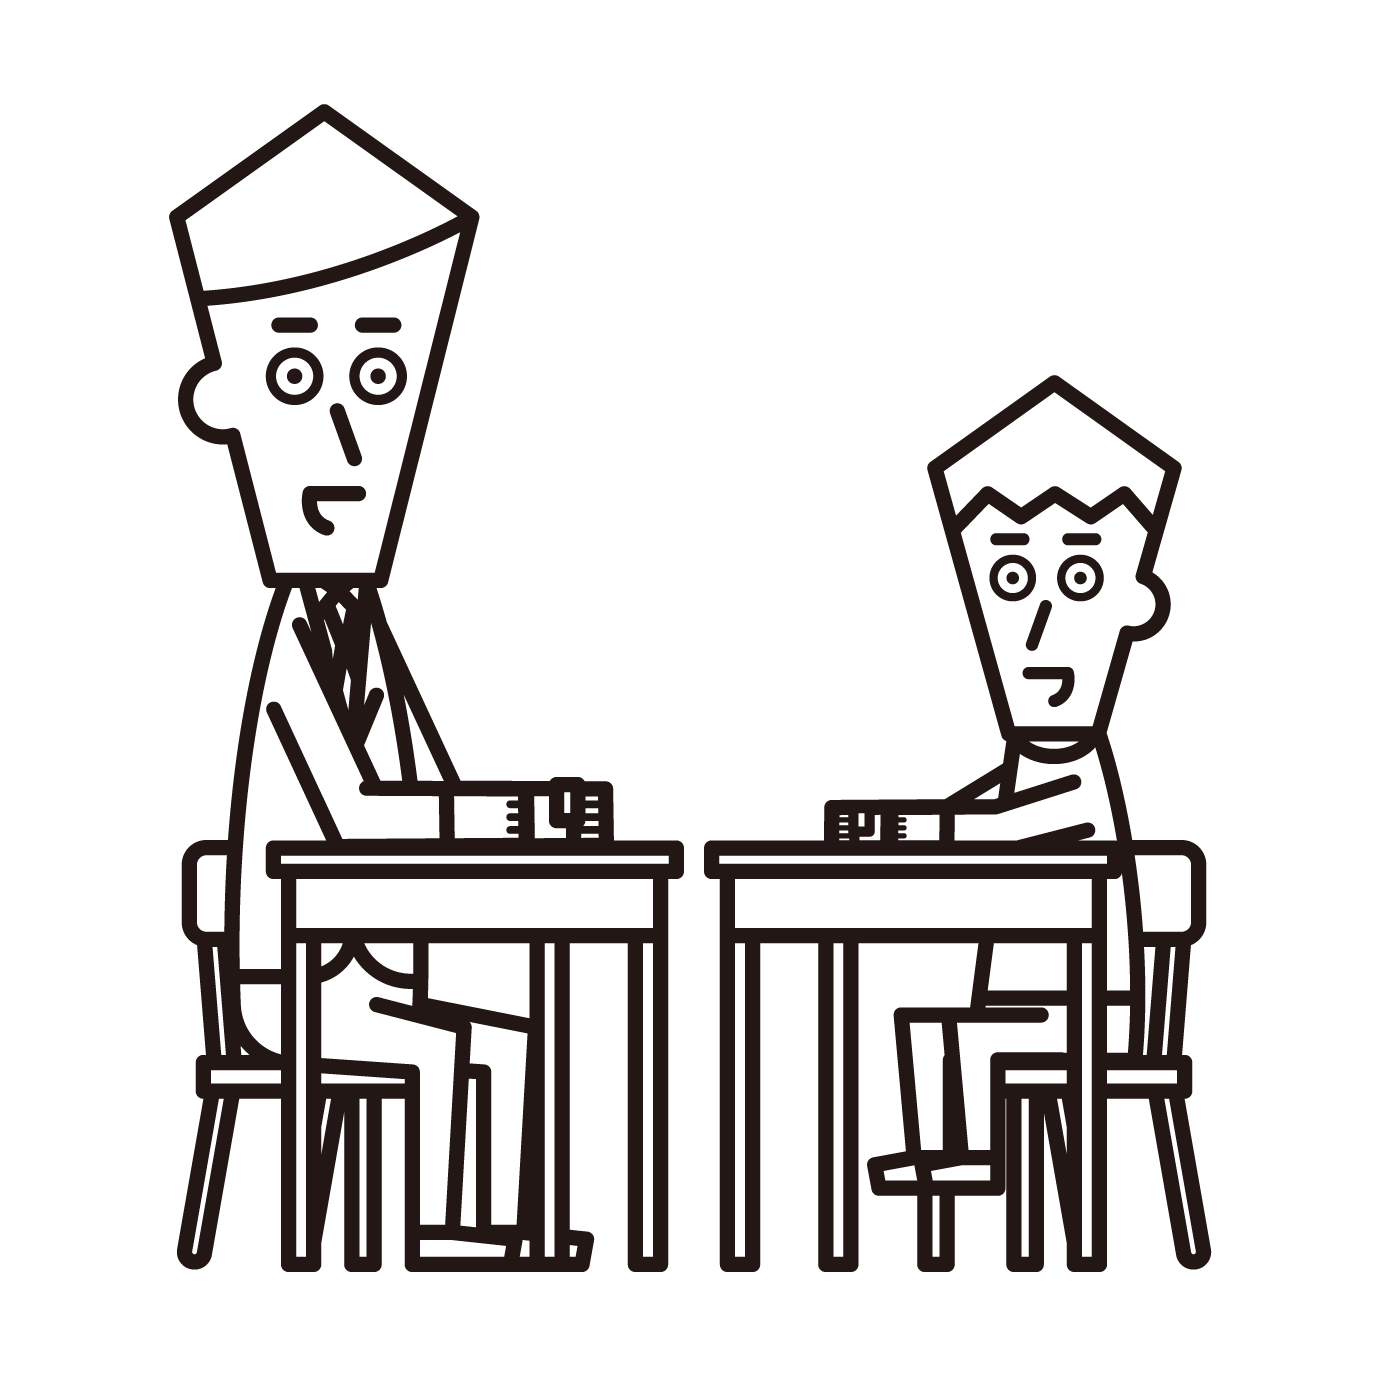 Illustration of an elementary school student (boy) having an interview with a teacher